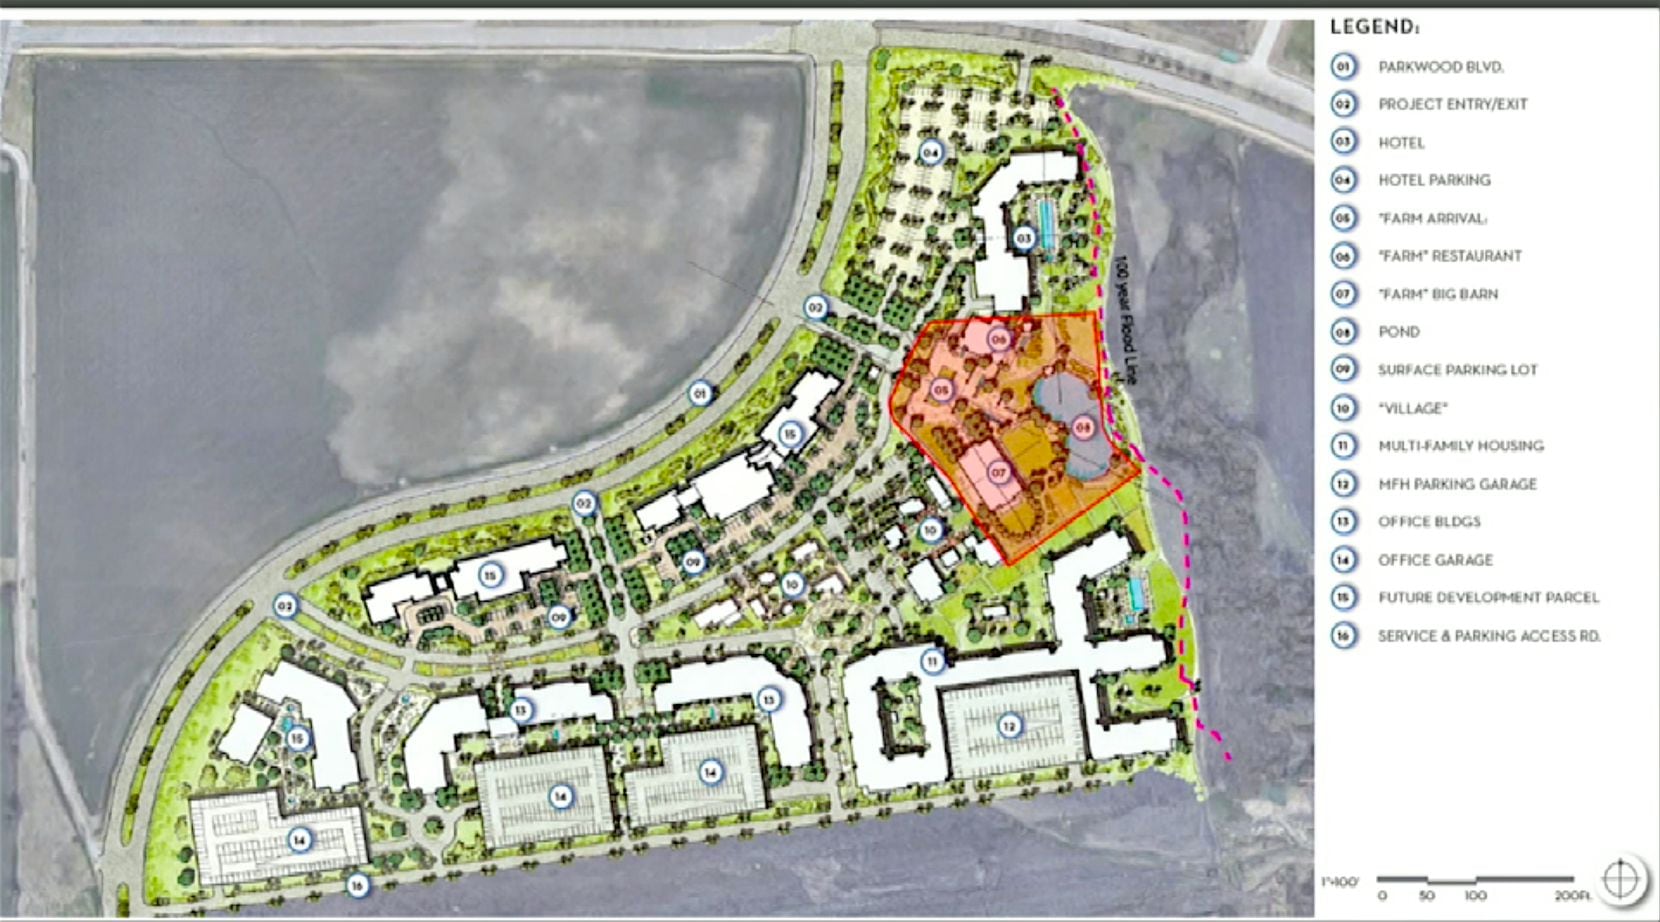 The 142-acre project located east of the Dallas North Tollway would include office, hotel, retail and residential buildings.